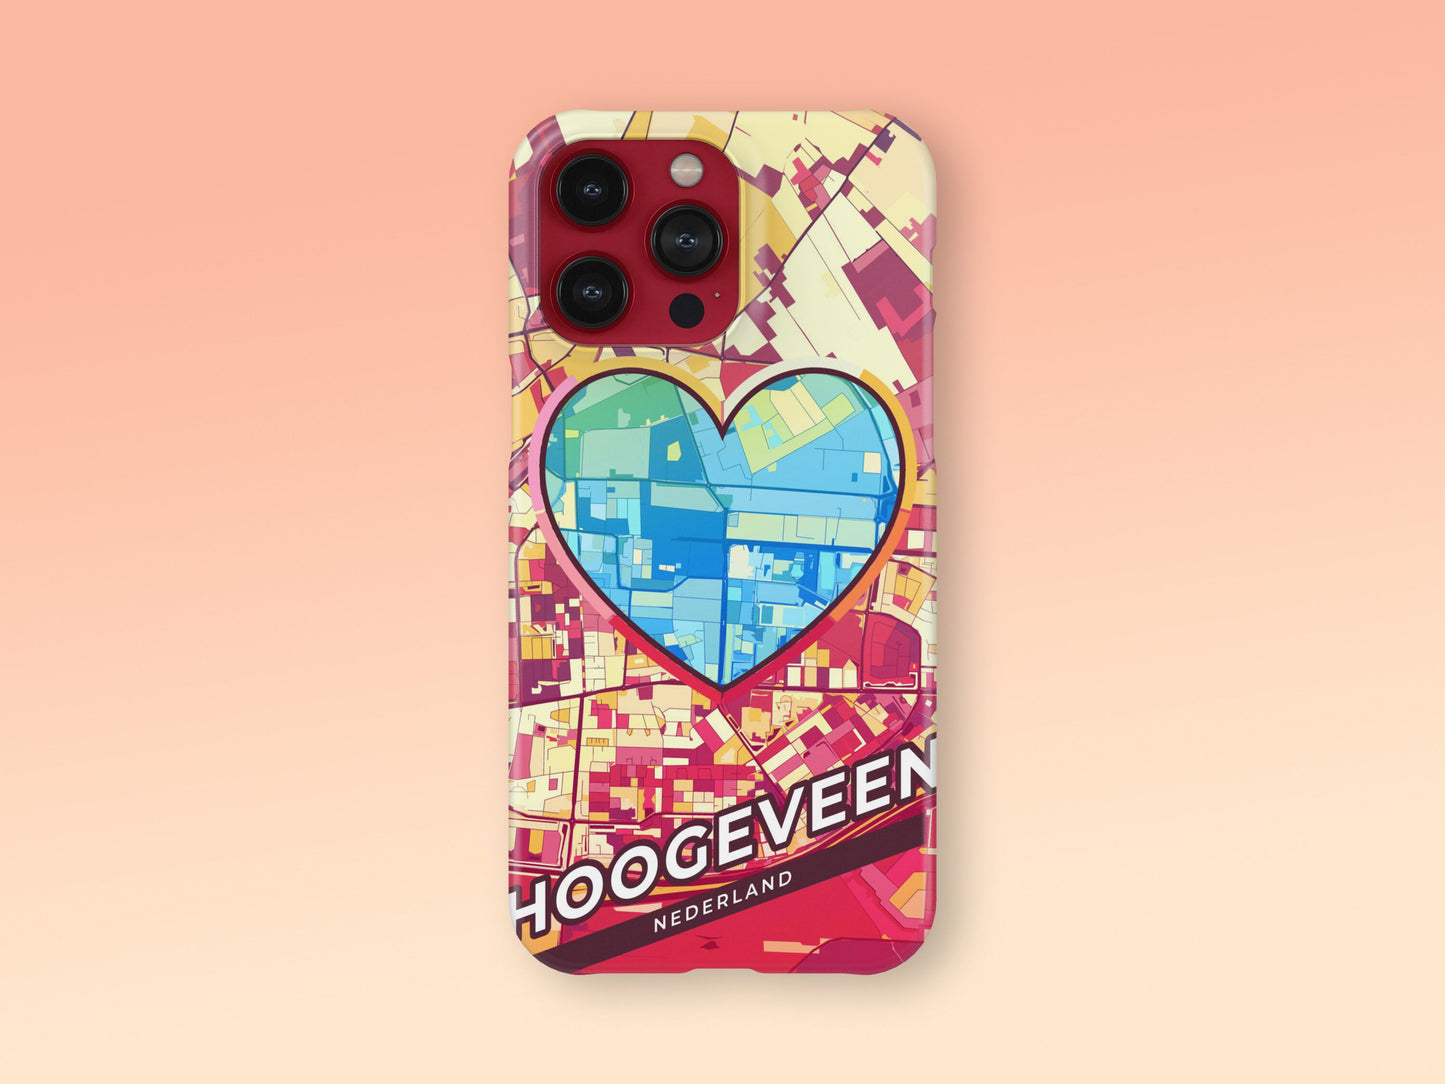 Hoogeveen Netherlands slim phone case with colorful icon. Birthday, wedding or housewarming gift. Couple match cases. 2